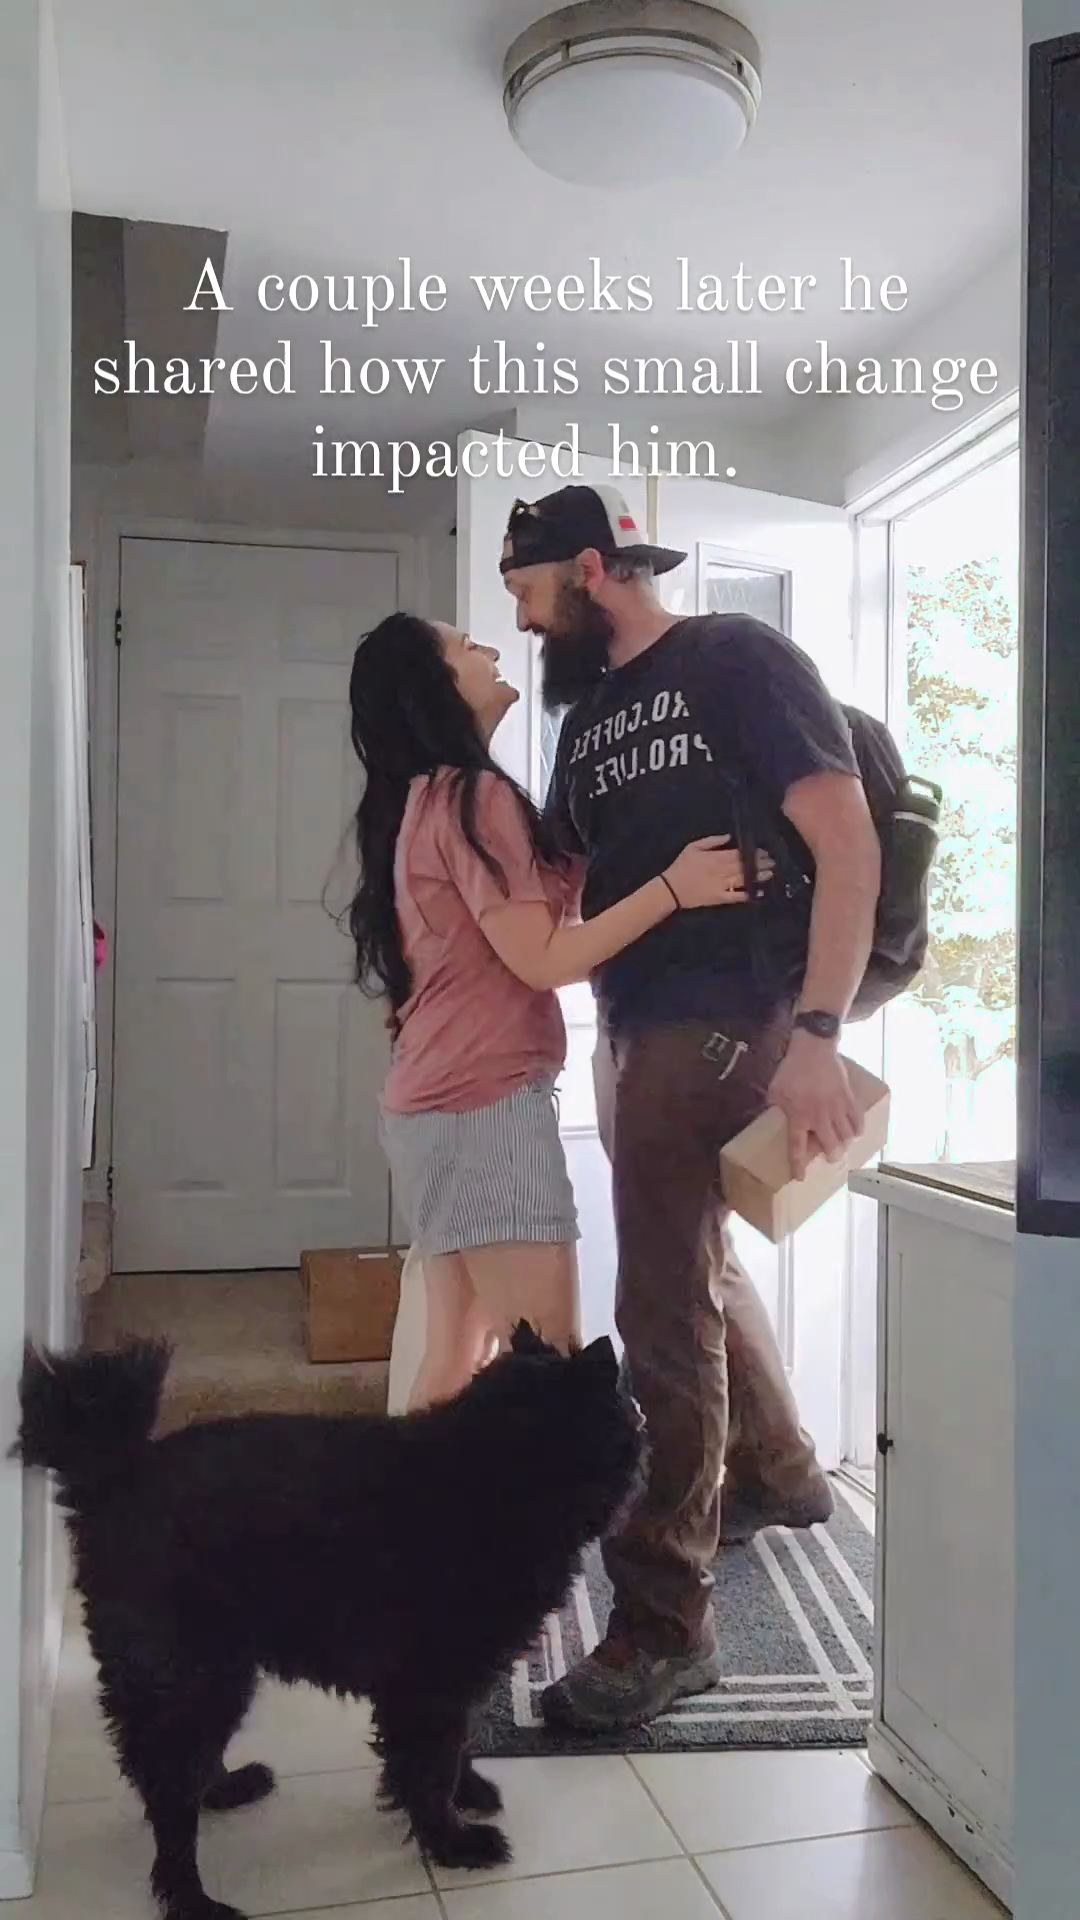 A Godly Marriage’: Mom of 5 Greets Husband at the Door Every Day, Her Small Act Impacts Him So Much